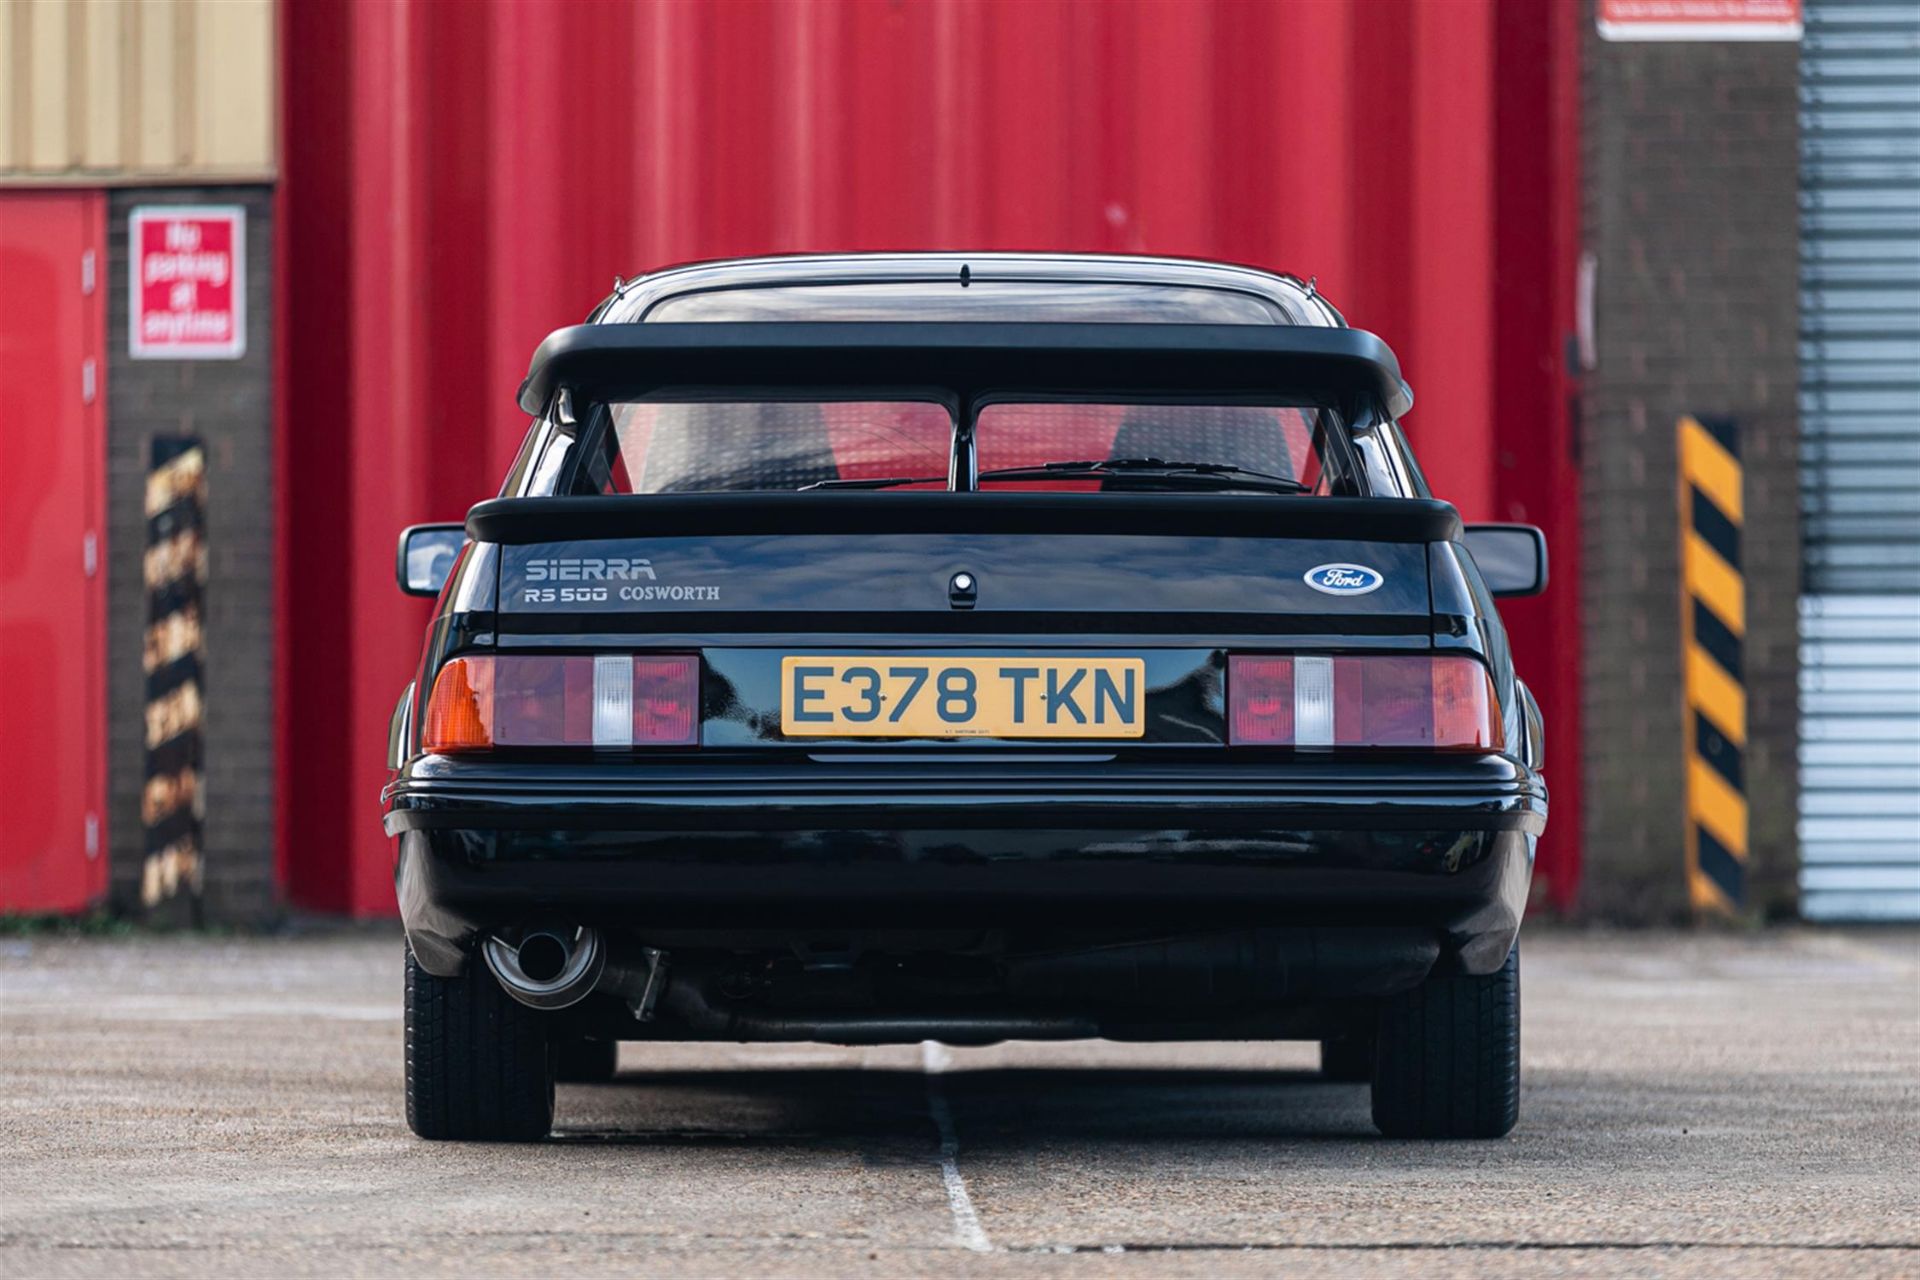 1987 Ford Sierra Cosworth RS500 - Image 7 of 10